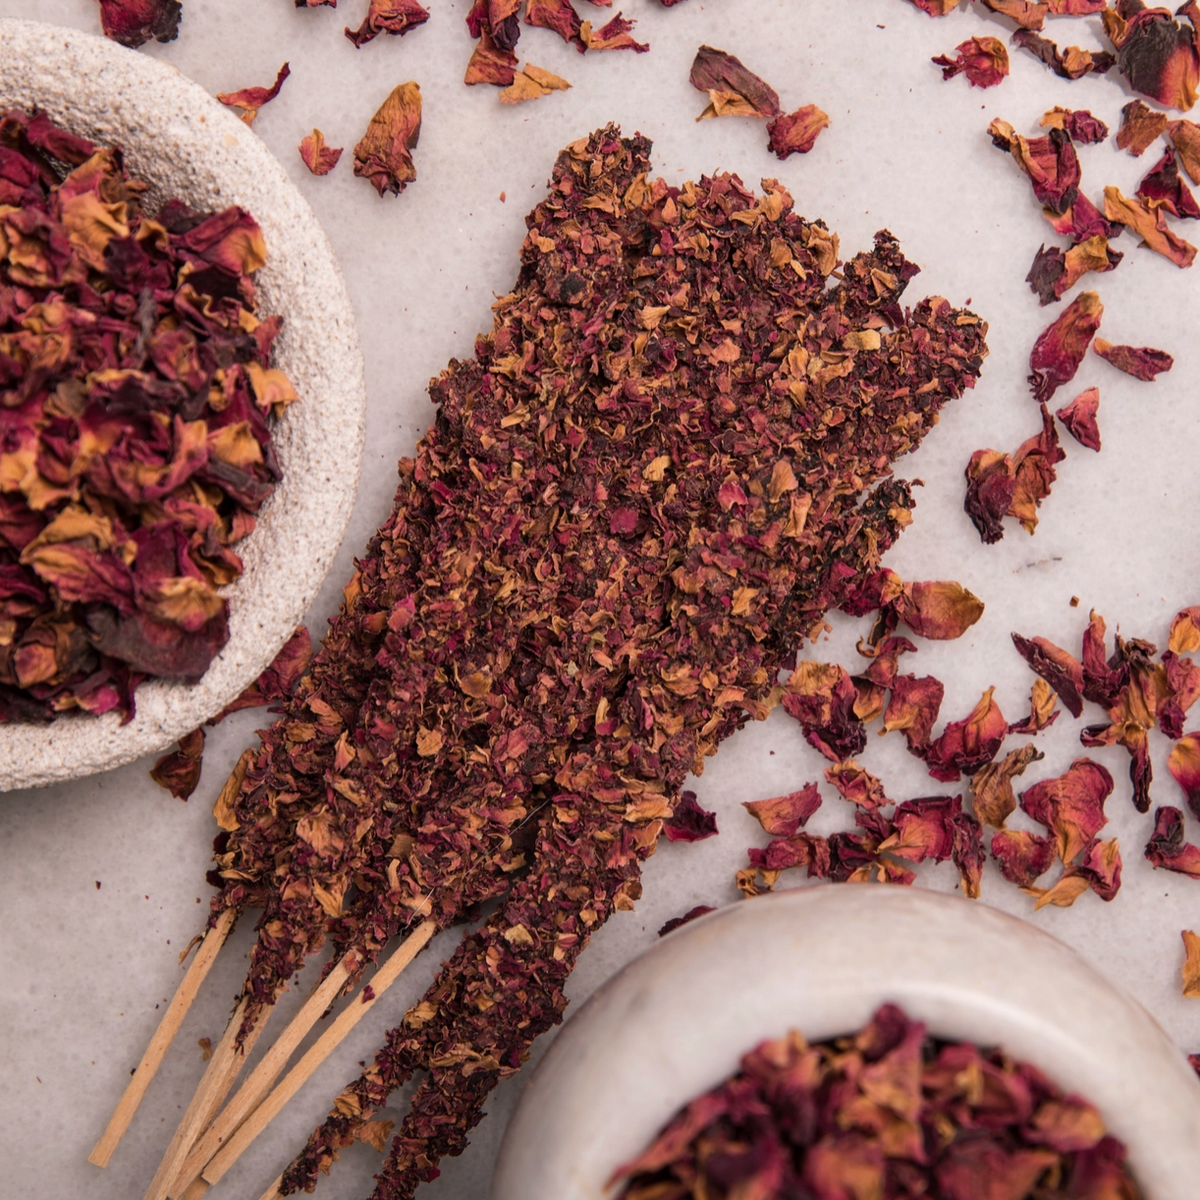 Roses and Olibanum Incense Sticks. Each stick is hand formed around an Olibanum (Frankincense) resin base then carefully packed with whole flowers, herbs and/or petals. Leaving a gorgeously decorated incense stick that is as impressive to see as it is to smell.